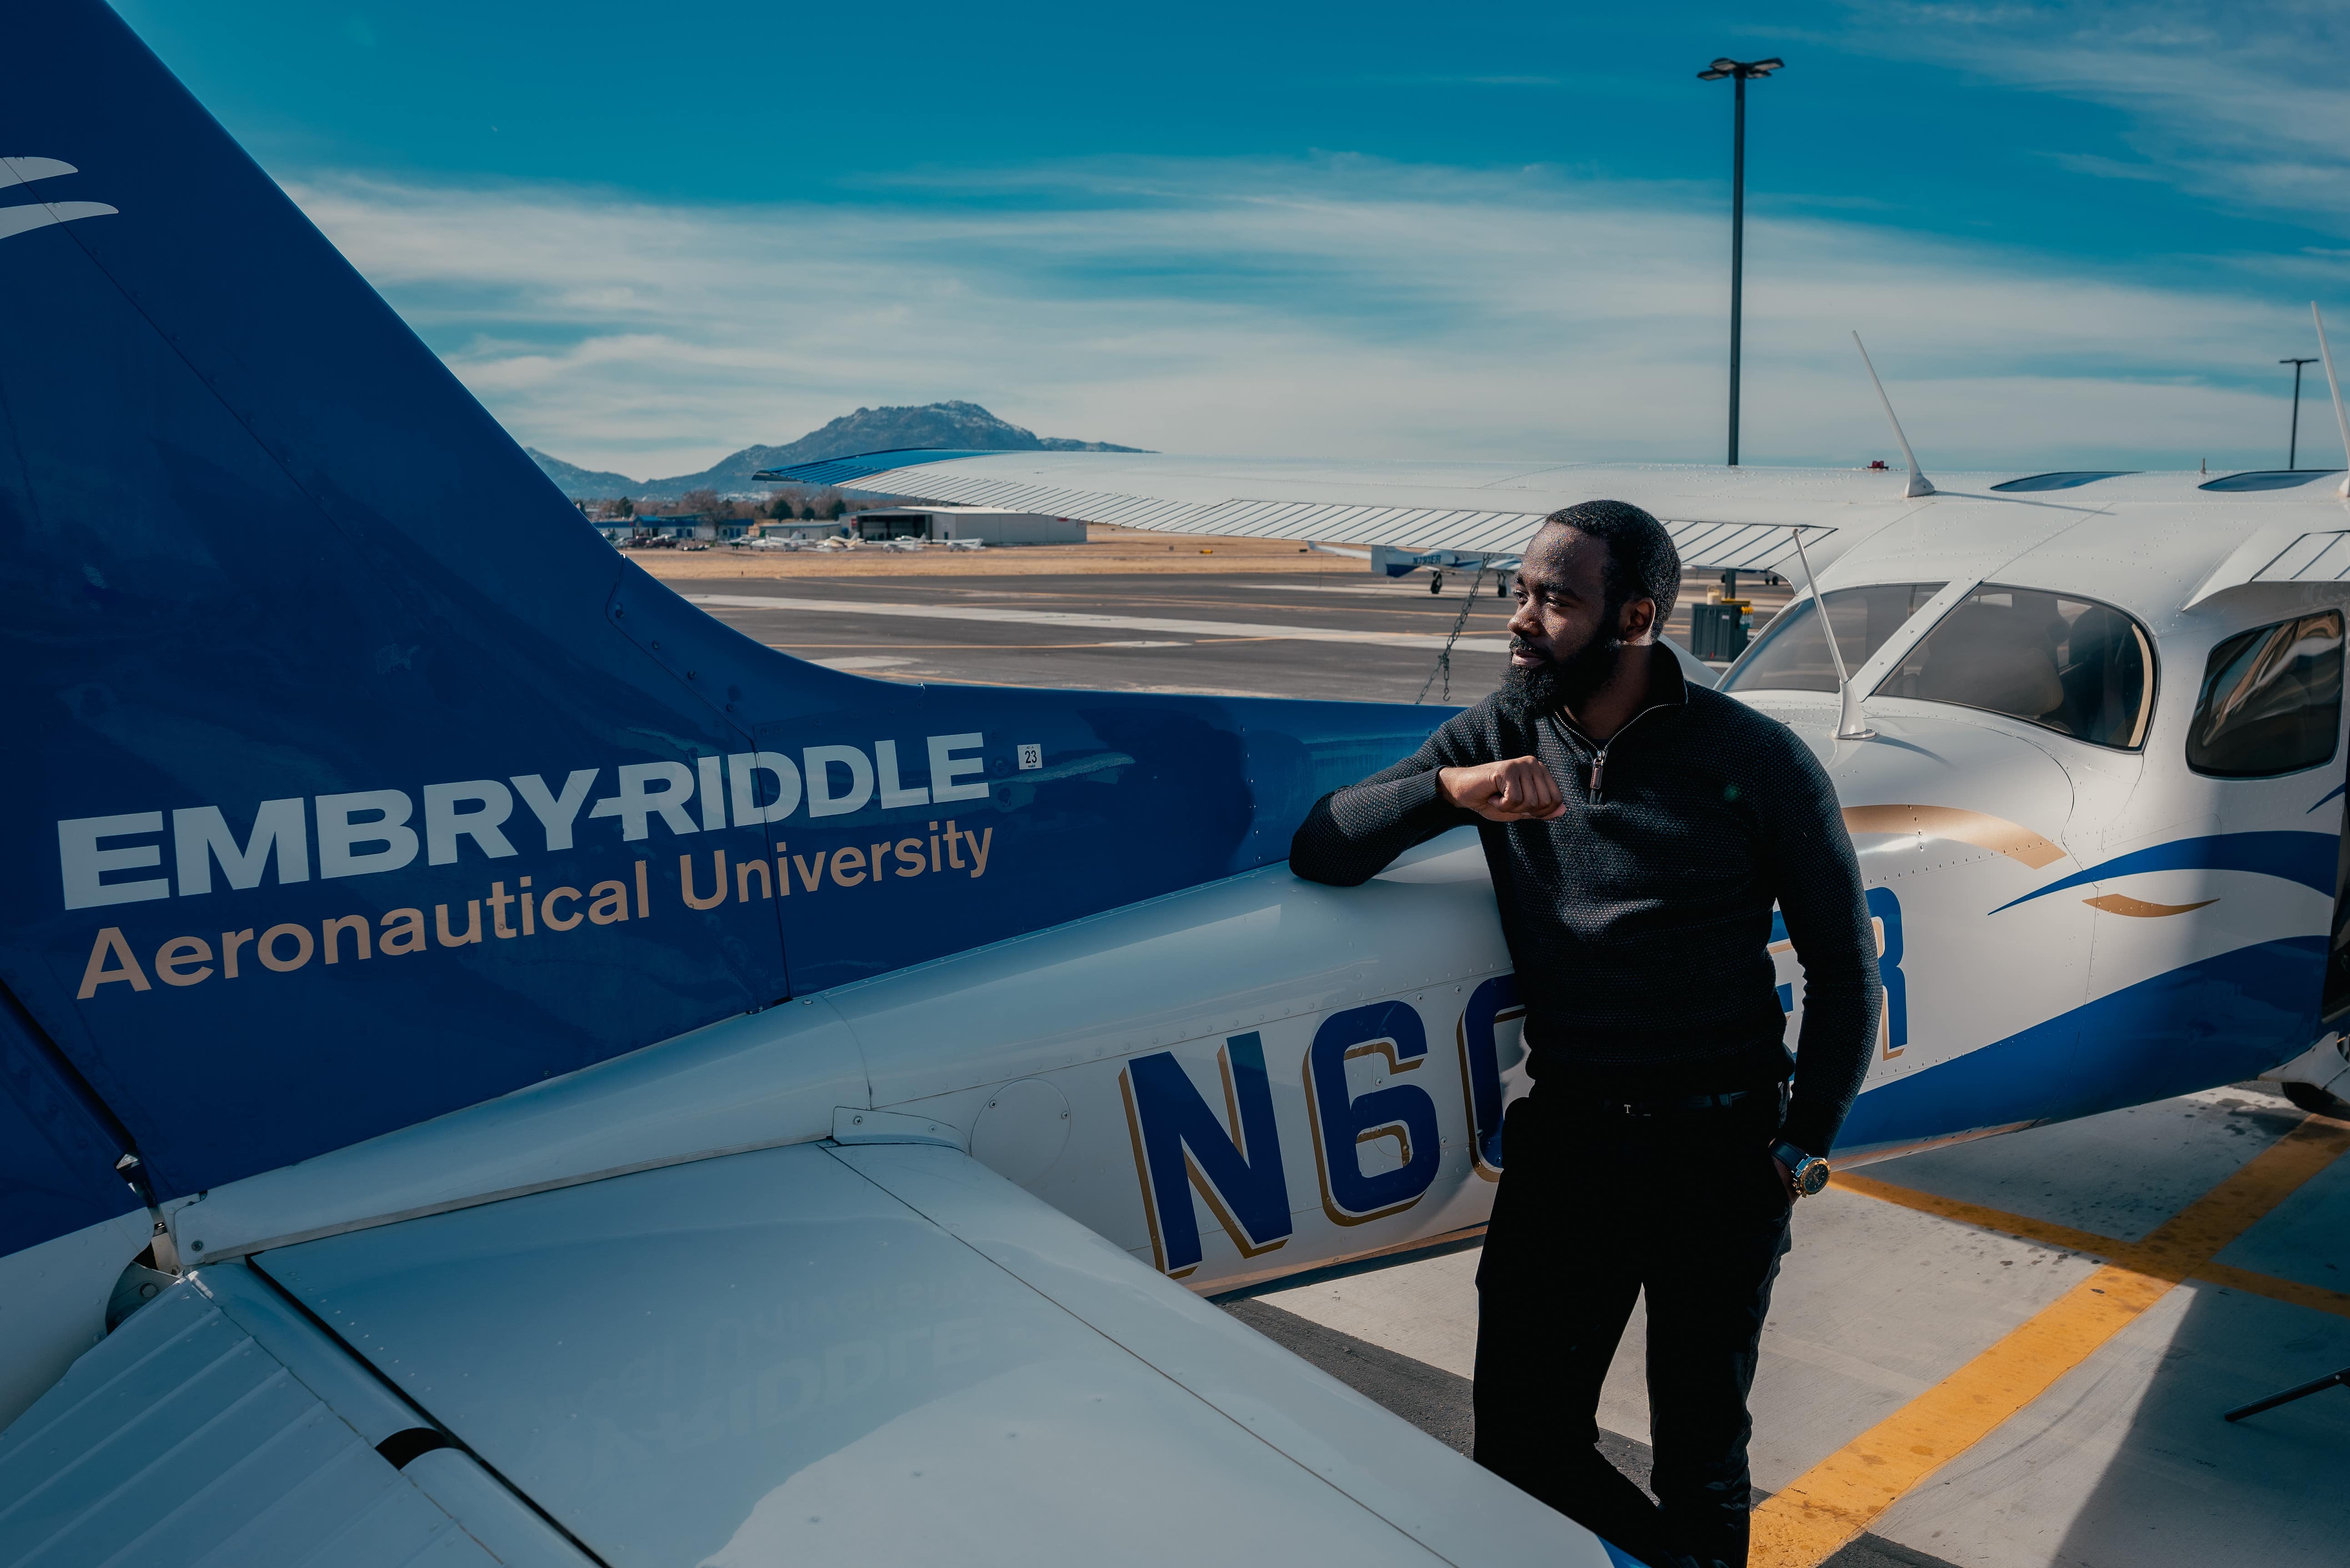 A Black student with a beard leans against a small aircraft. Prescott's Granite Mountain can be seen in the background.